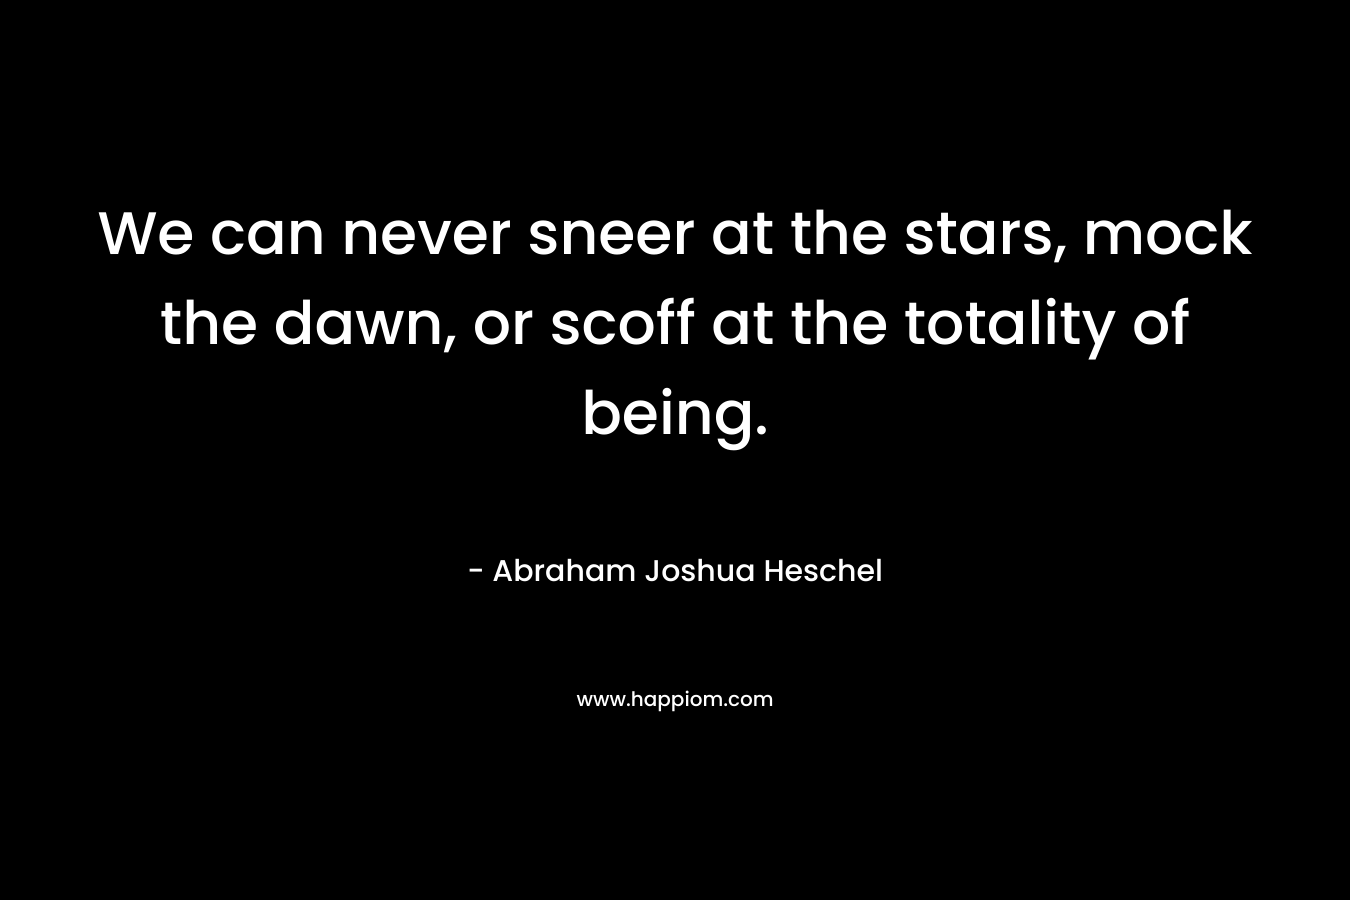 We can never sneer at the stars, mock the dawn, or scoff at the totality of being. – Abraham Joshua Heschel